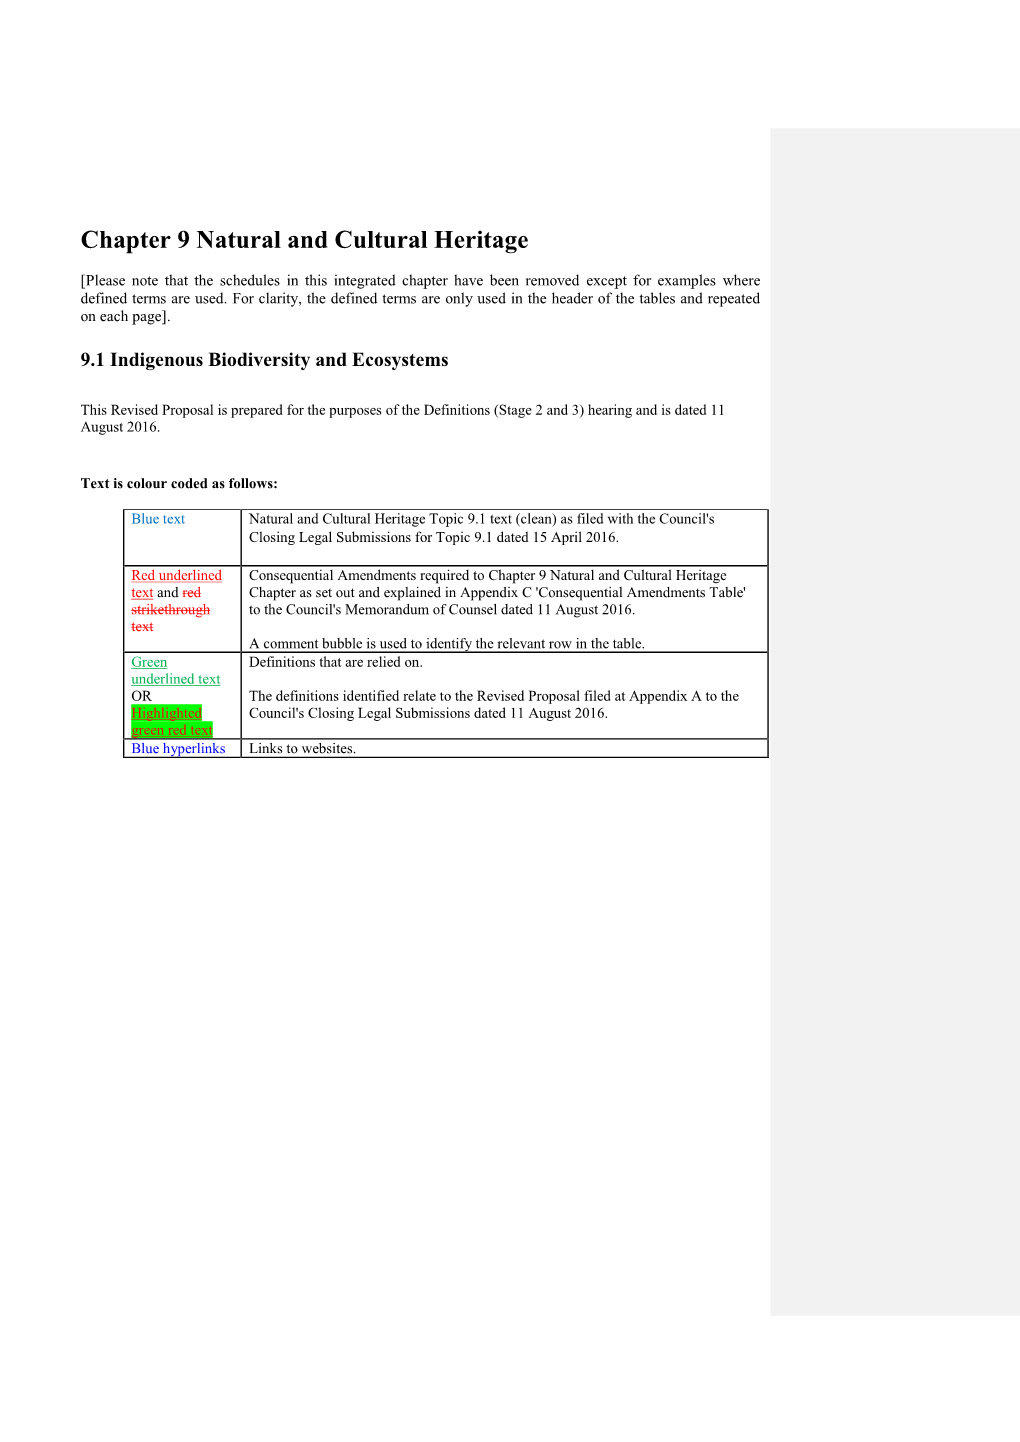 Appendix E Chapter 9 Natural and Cultural Heritage – Definitions Version